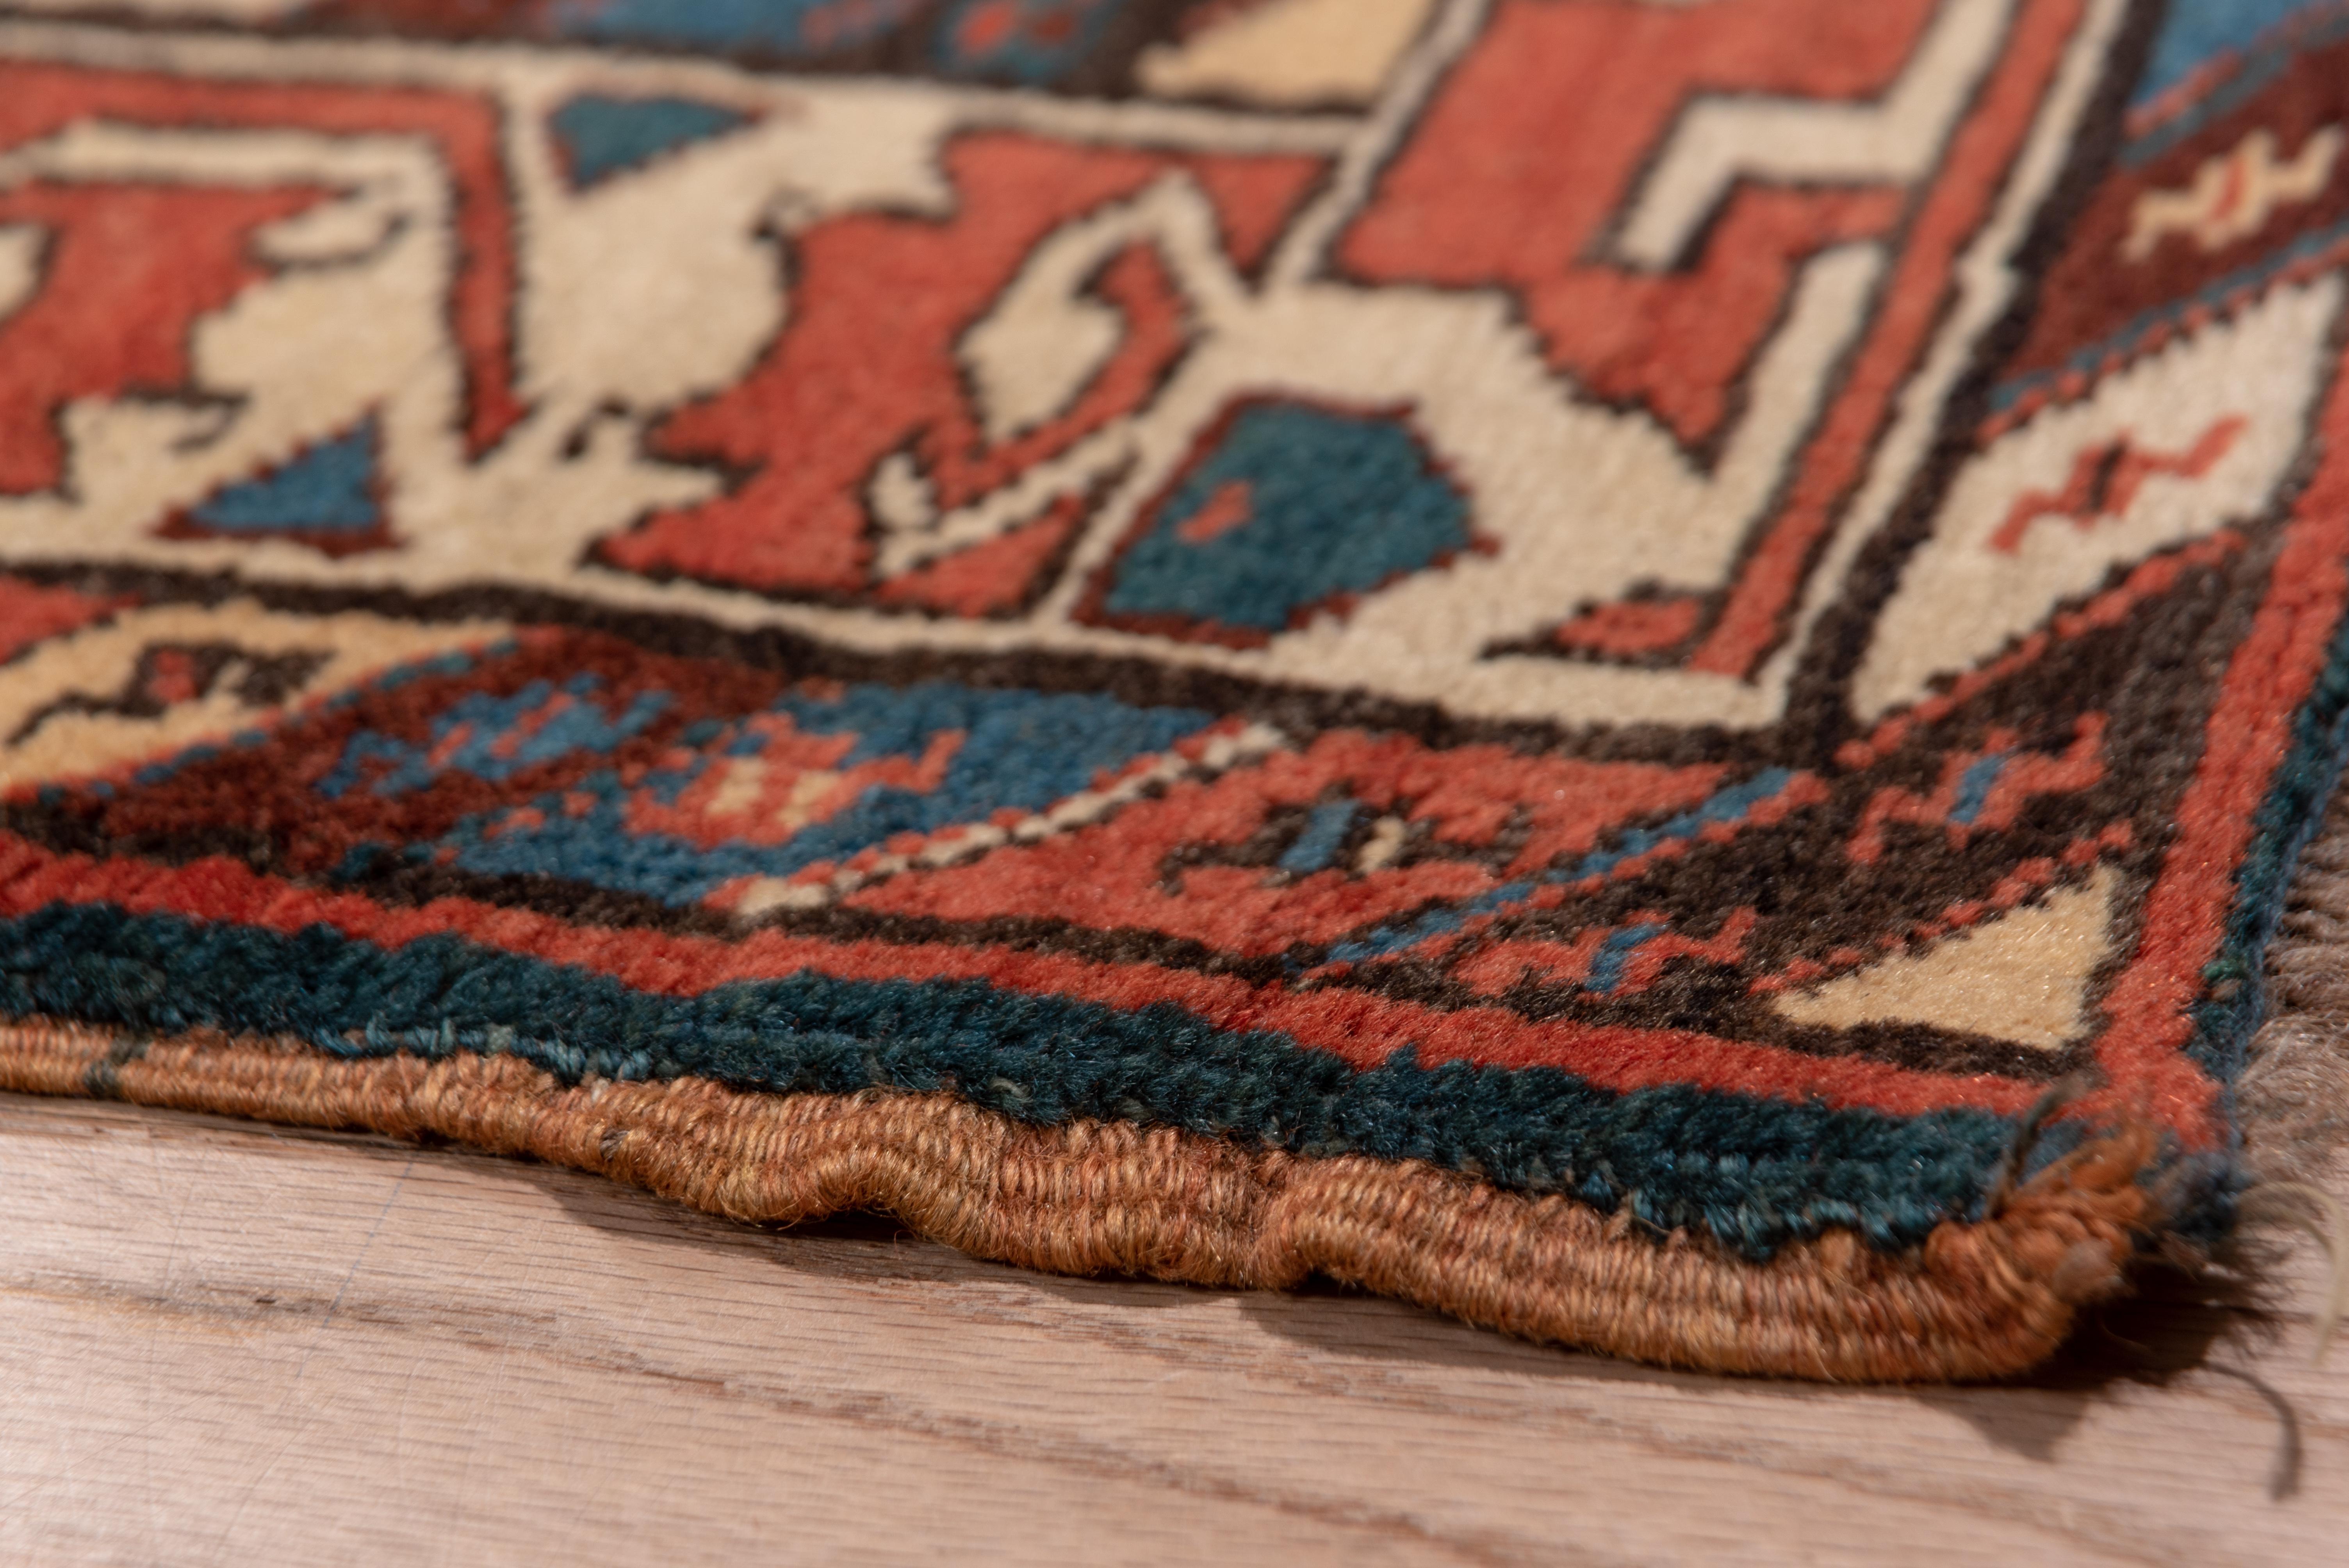 The red, blue and brown field of this rustic runner show tightly packed, reversing offset rows of hexagonal botehs accented in medium blue. The unusual Turkmen-style ivory strip-style border shows reversing paired serrated curled leavers forming